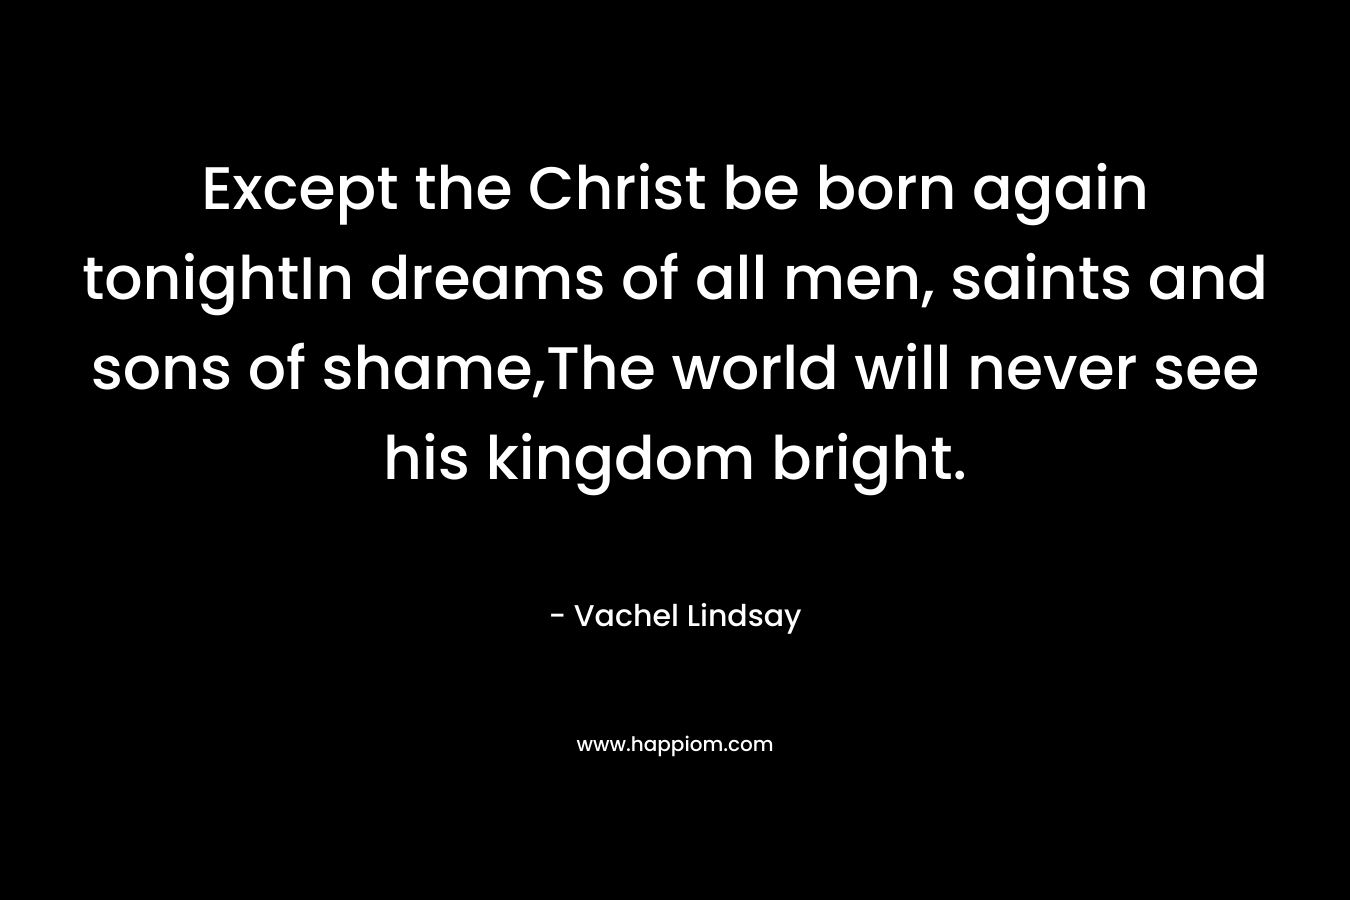 Except the Christ be born again tonightIn dreams of all men, saints and sons of shame,The world will never see his kingdom bright. – Vachel Lindsay